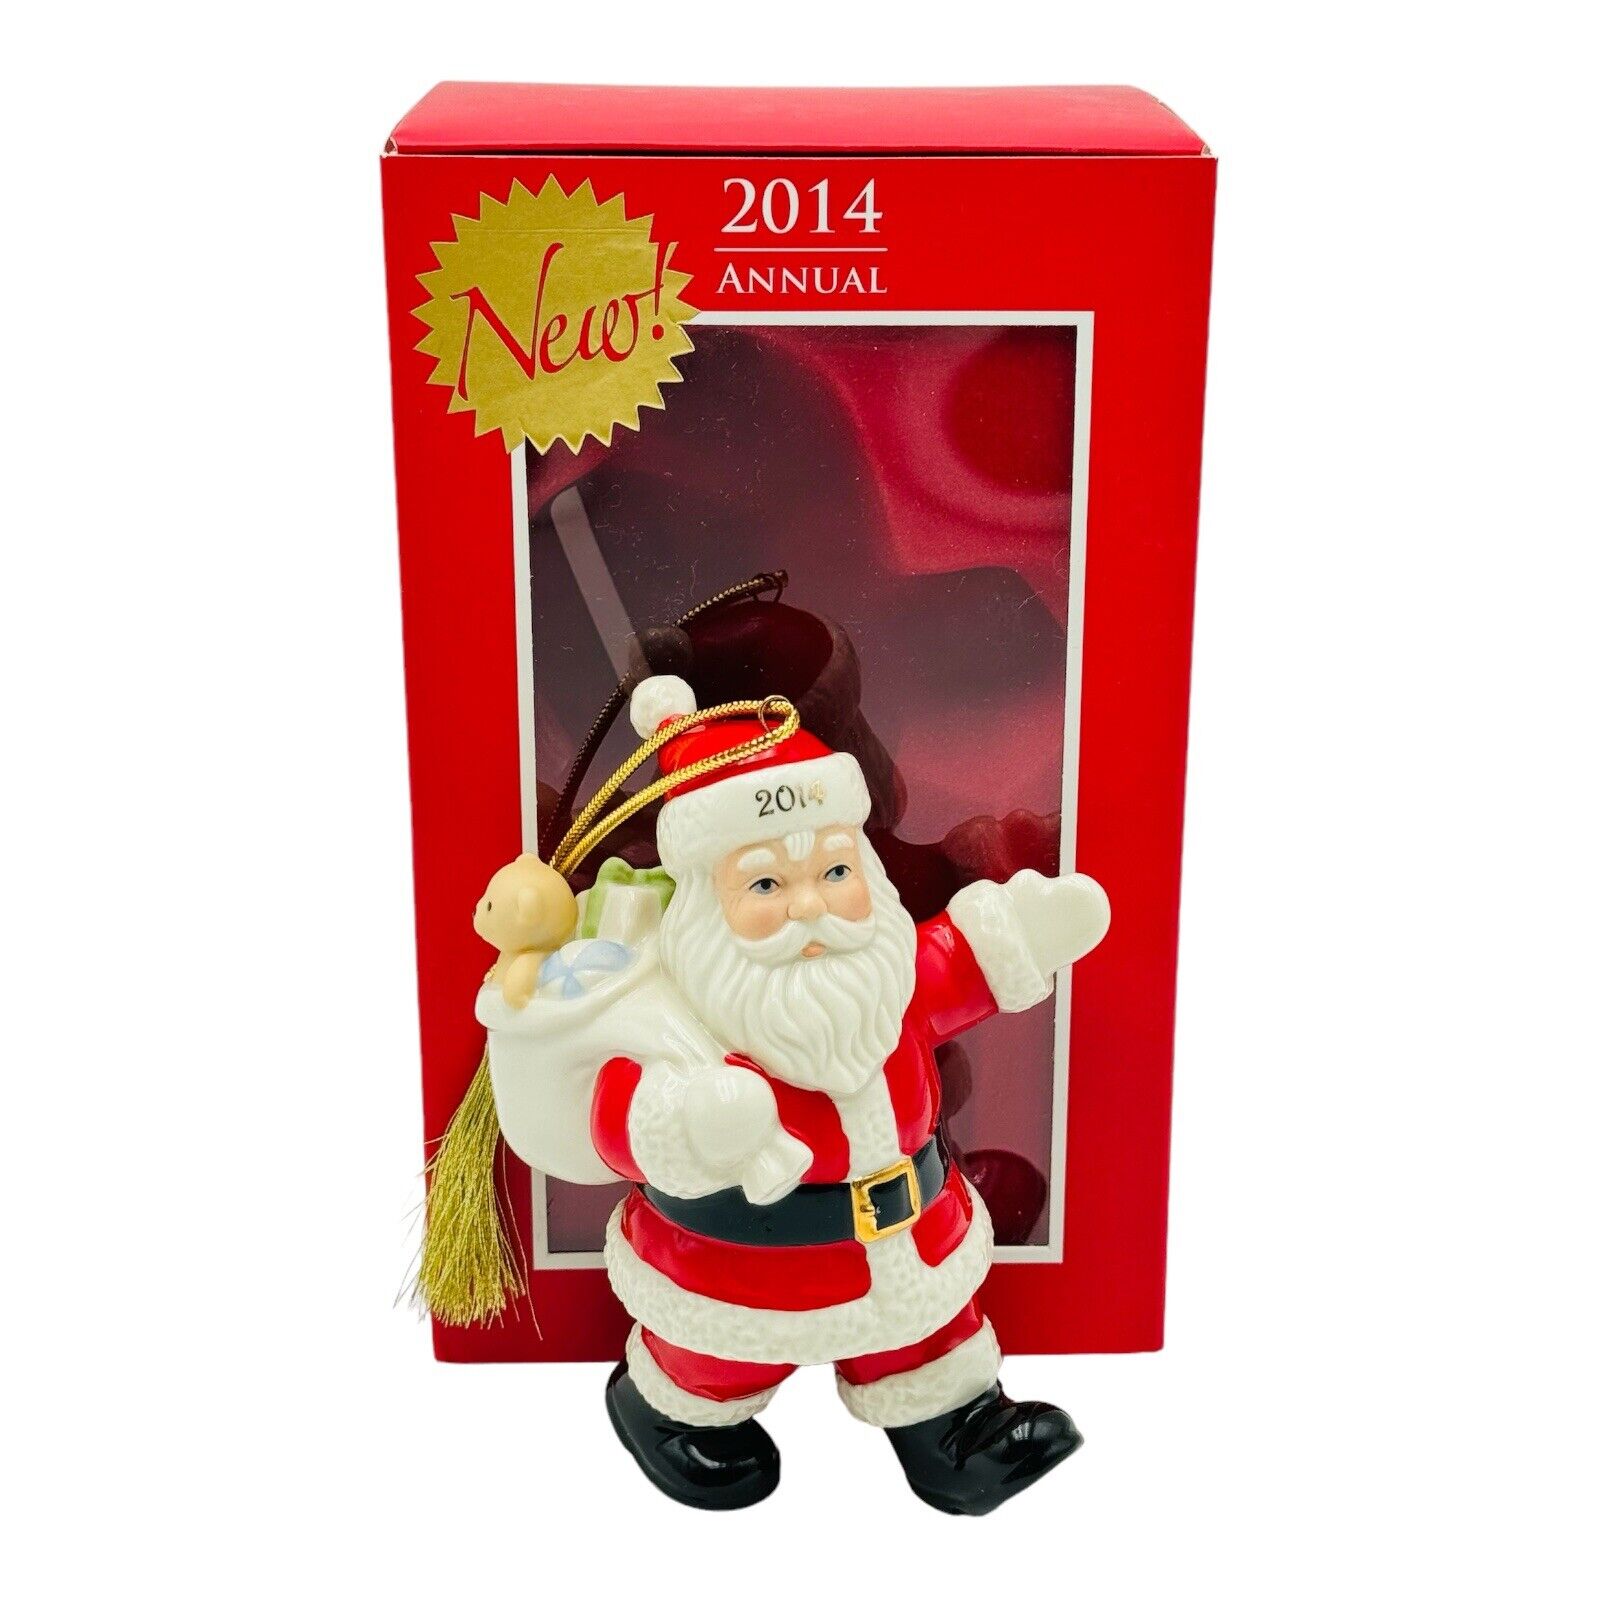 Lenox 2014 Annual Special Delivery Santa Christmas Ornament Porcelain NEW